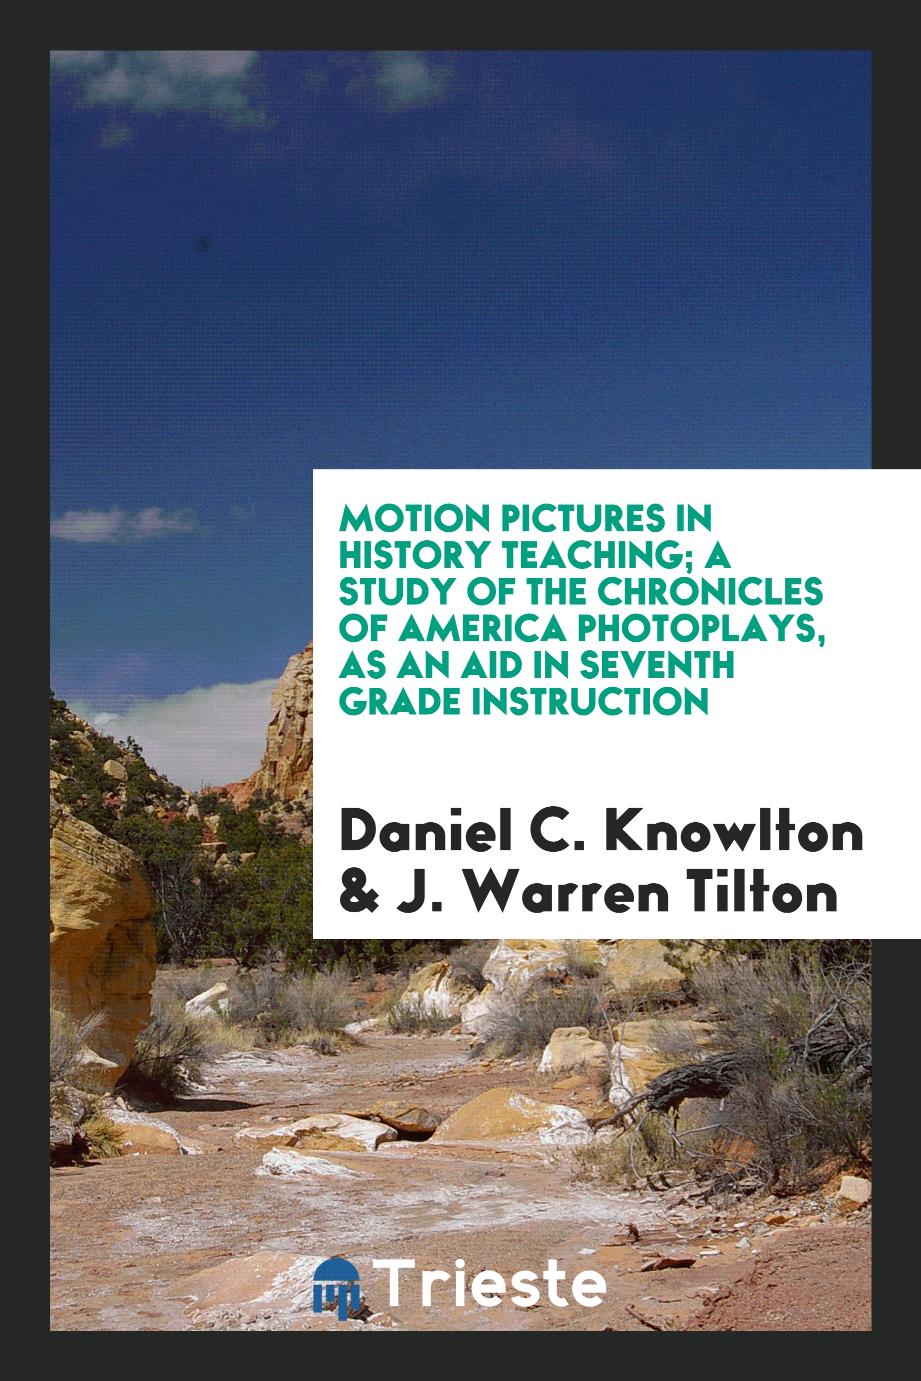 Motion pictures in history teaching; a study of the Chronicles of America photoplays, as an aid in seventh grade instruction